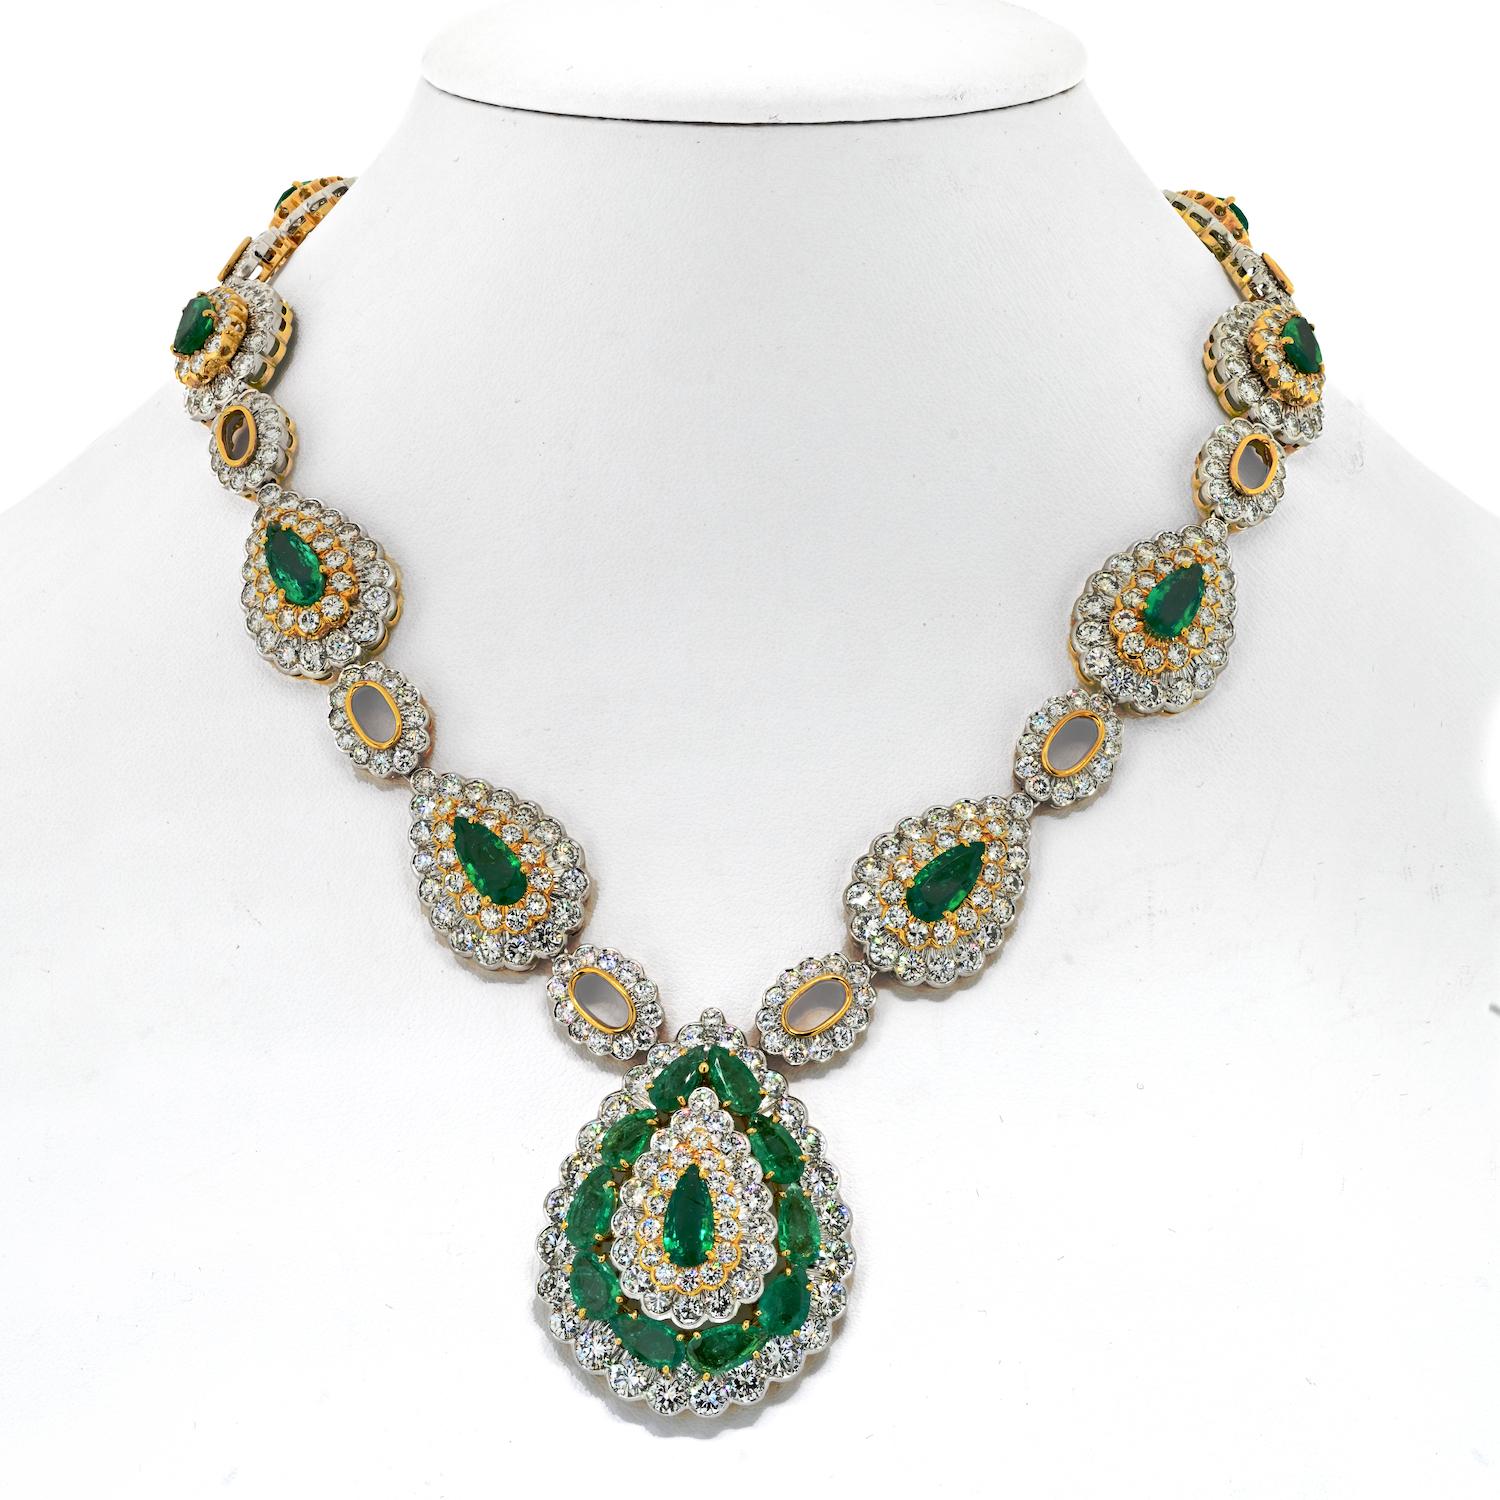 Immerse yourself in the vivid world of color with this exuberant, voluptuous, and audacious diamond and emerald necklace by David Webb. A vintage masterpiece crafted in platinum and yellow gold, this necklace is a celebration of luxury, design, and